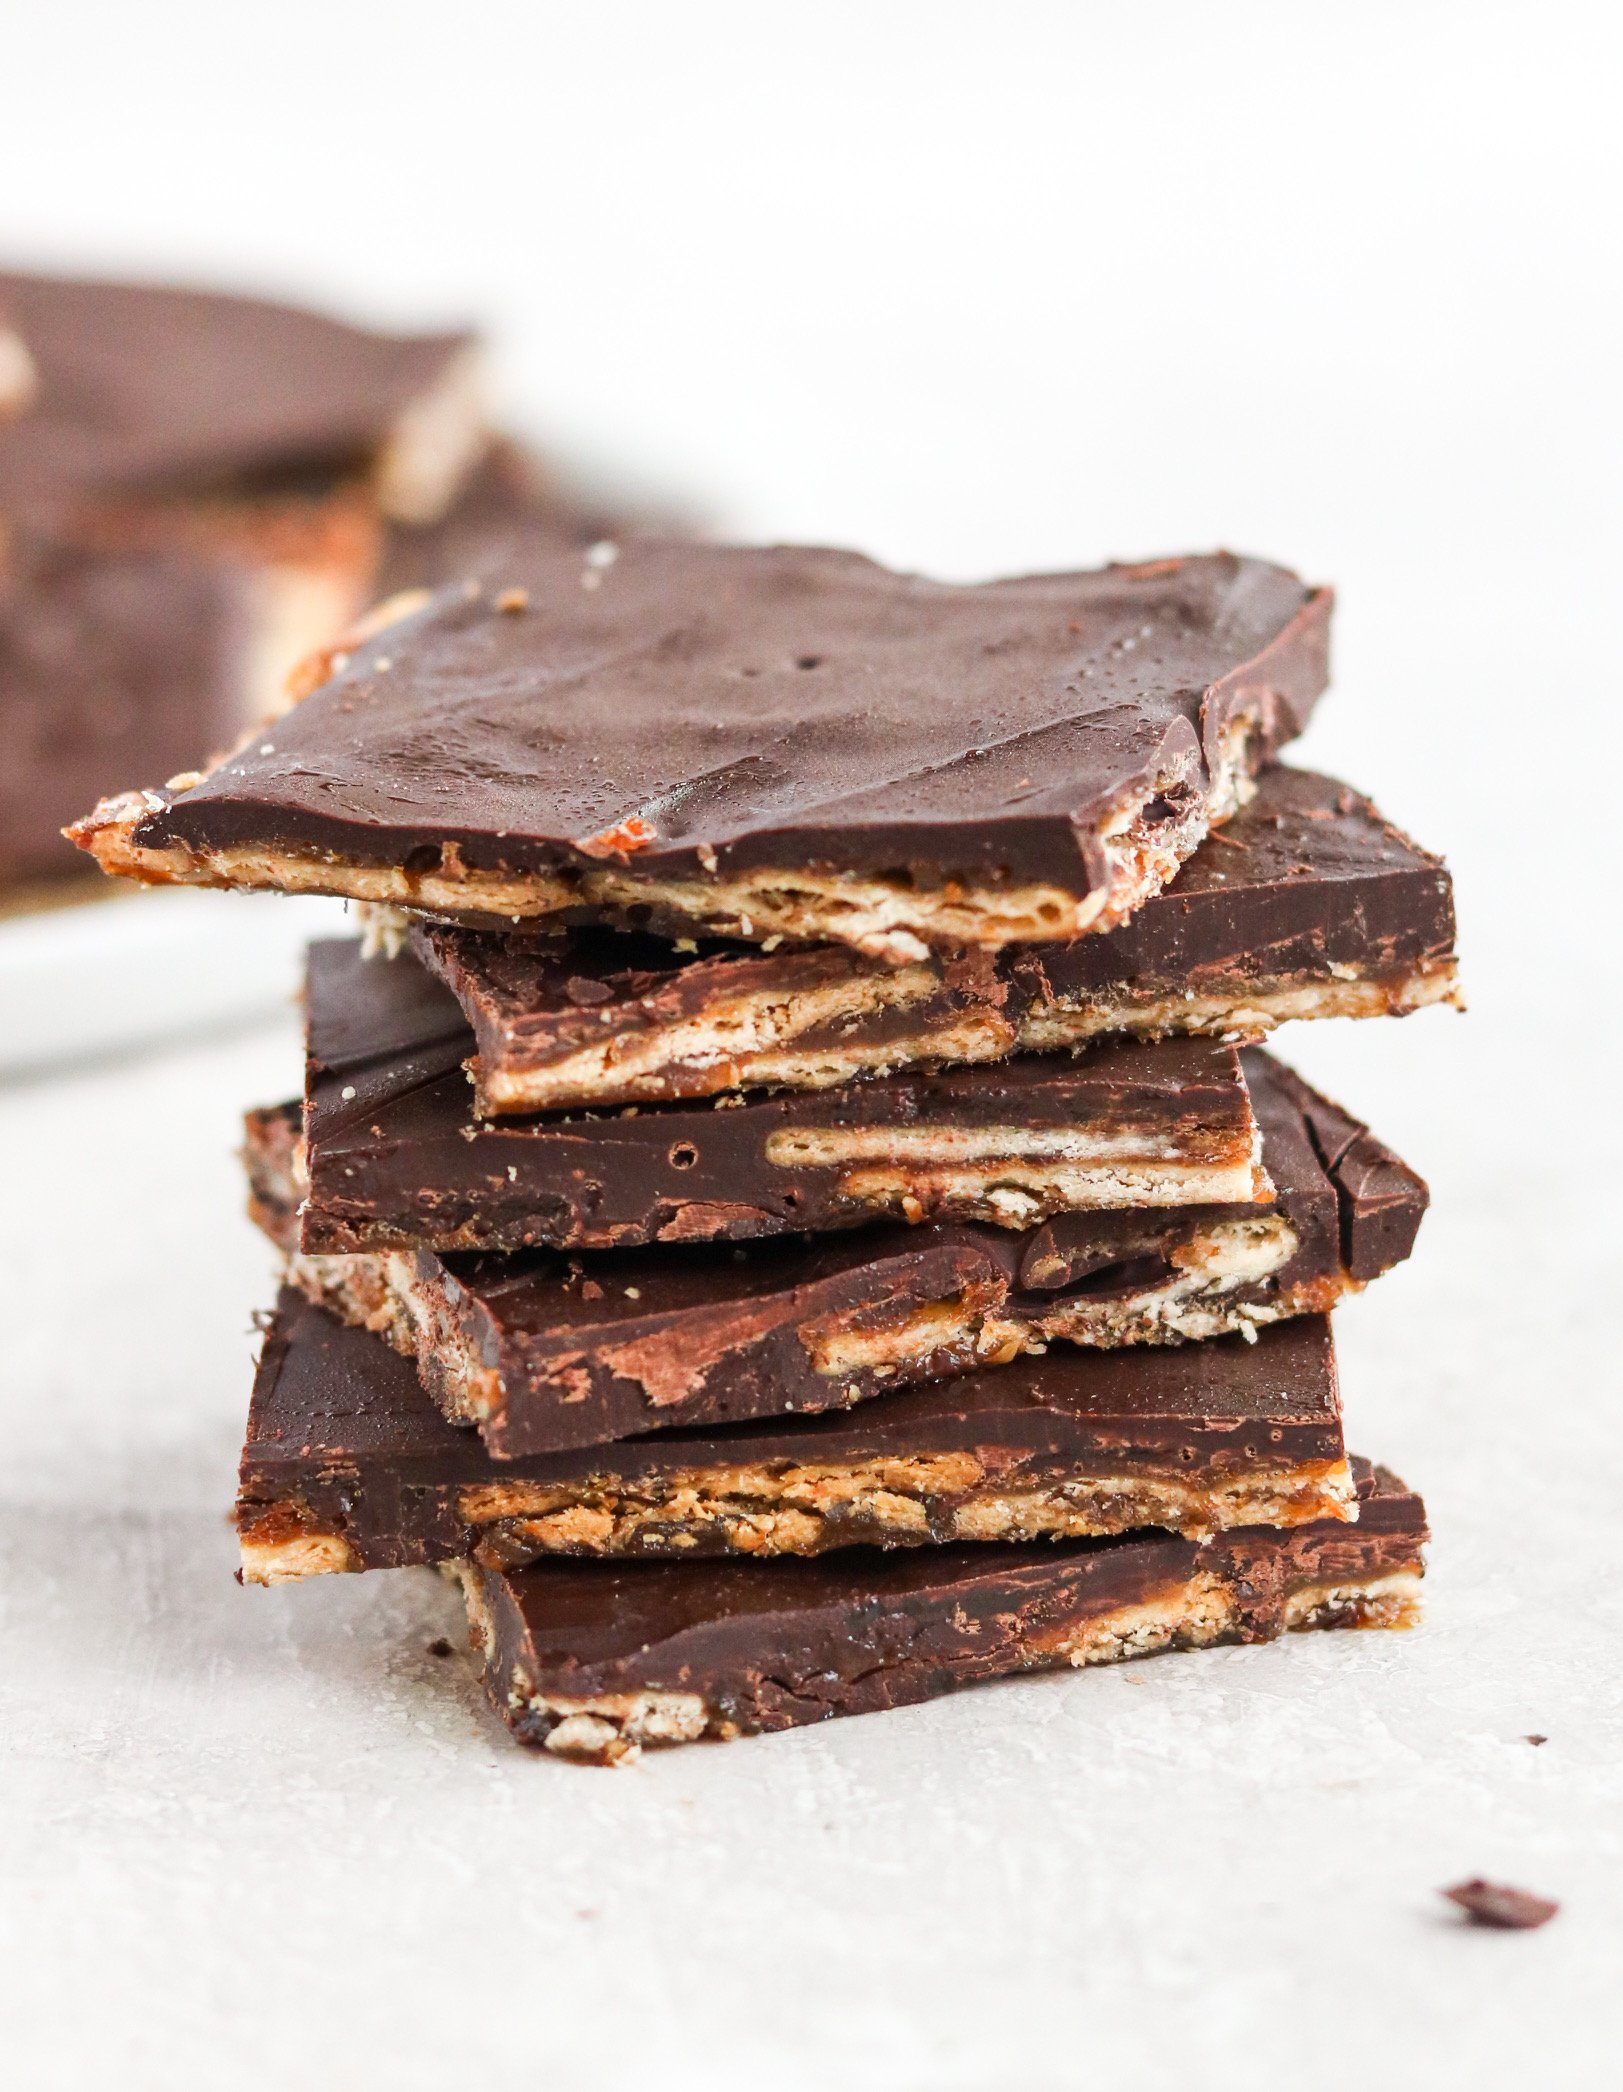 A stack of Christmas Crack dessert with crackers, chocolate and caramel